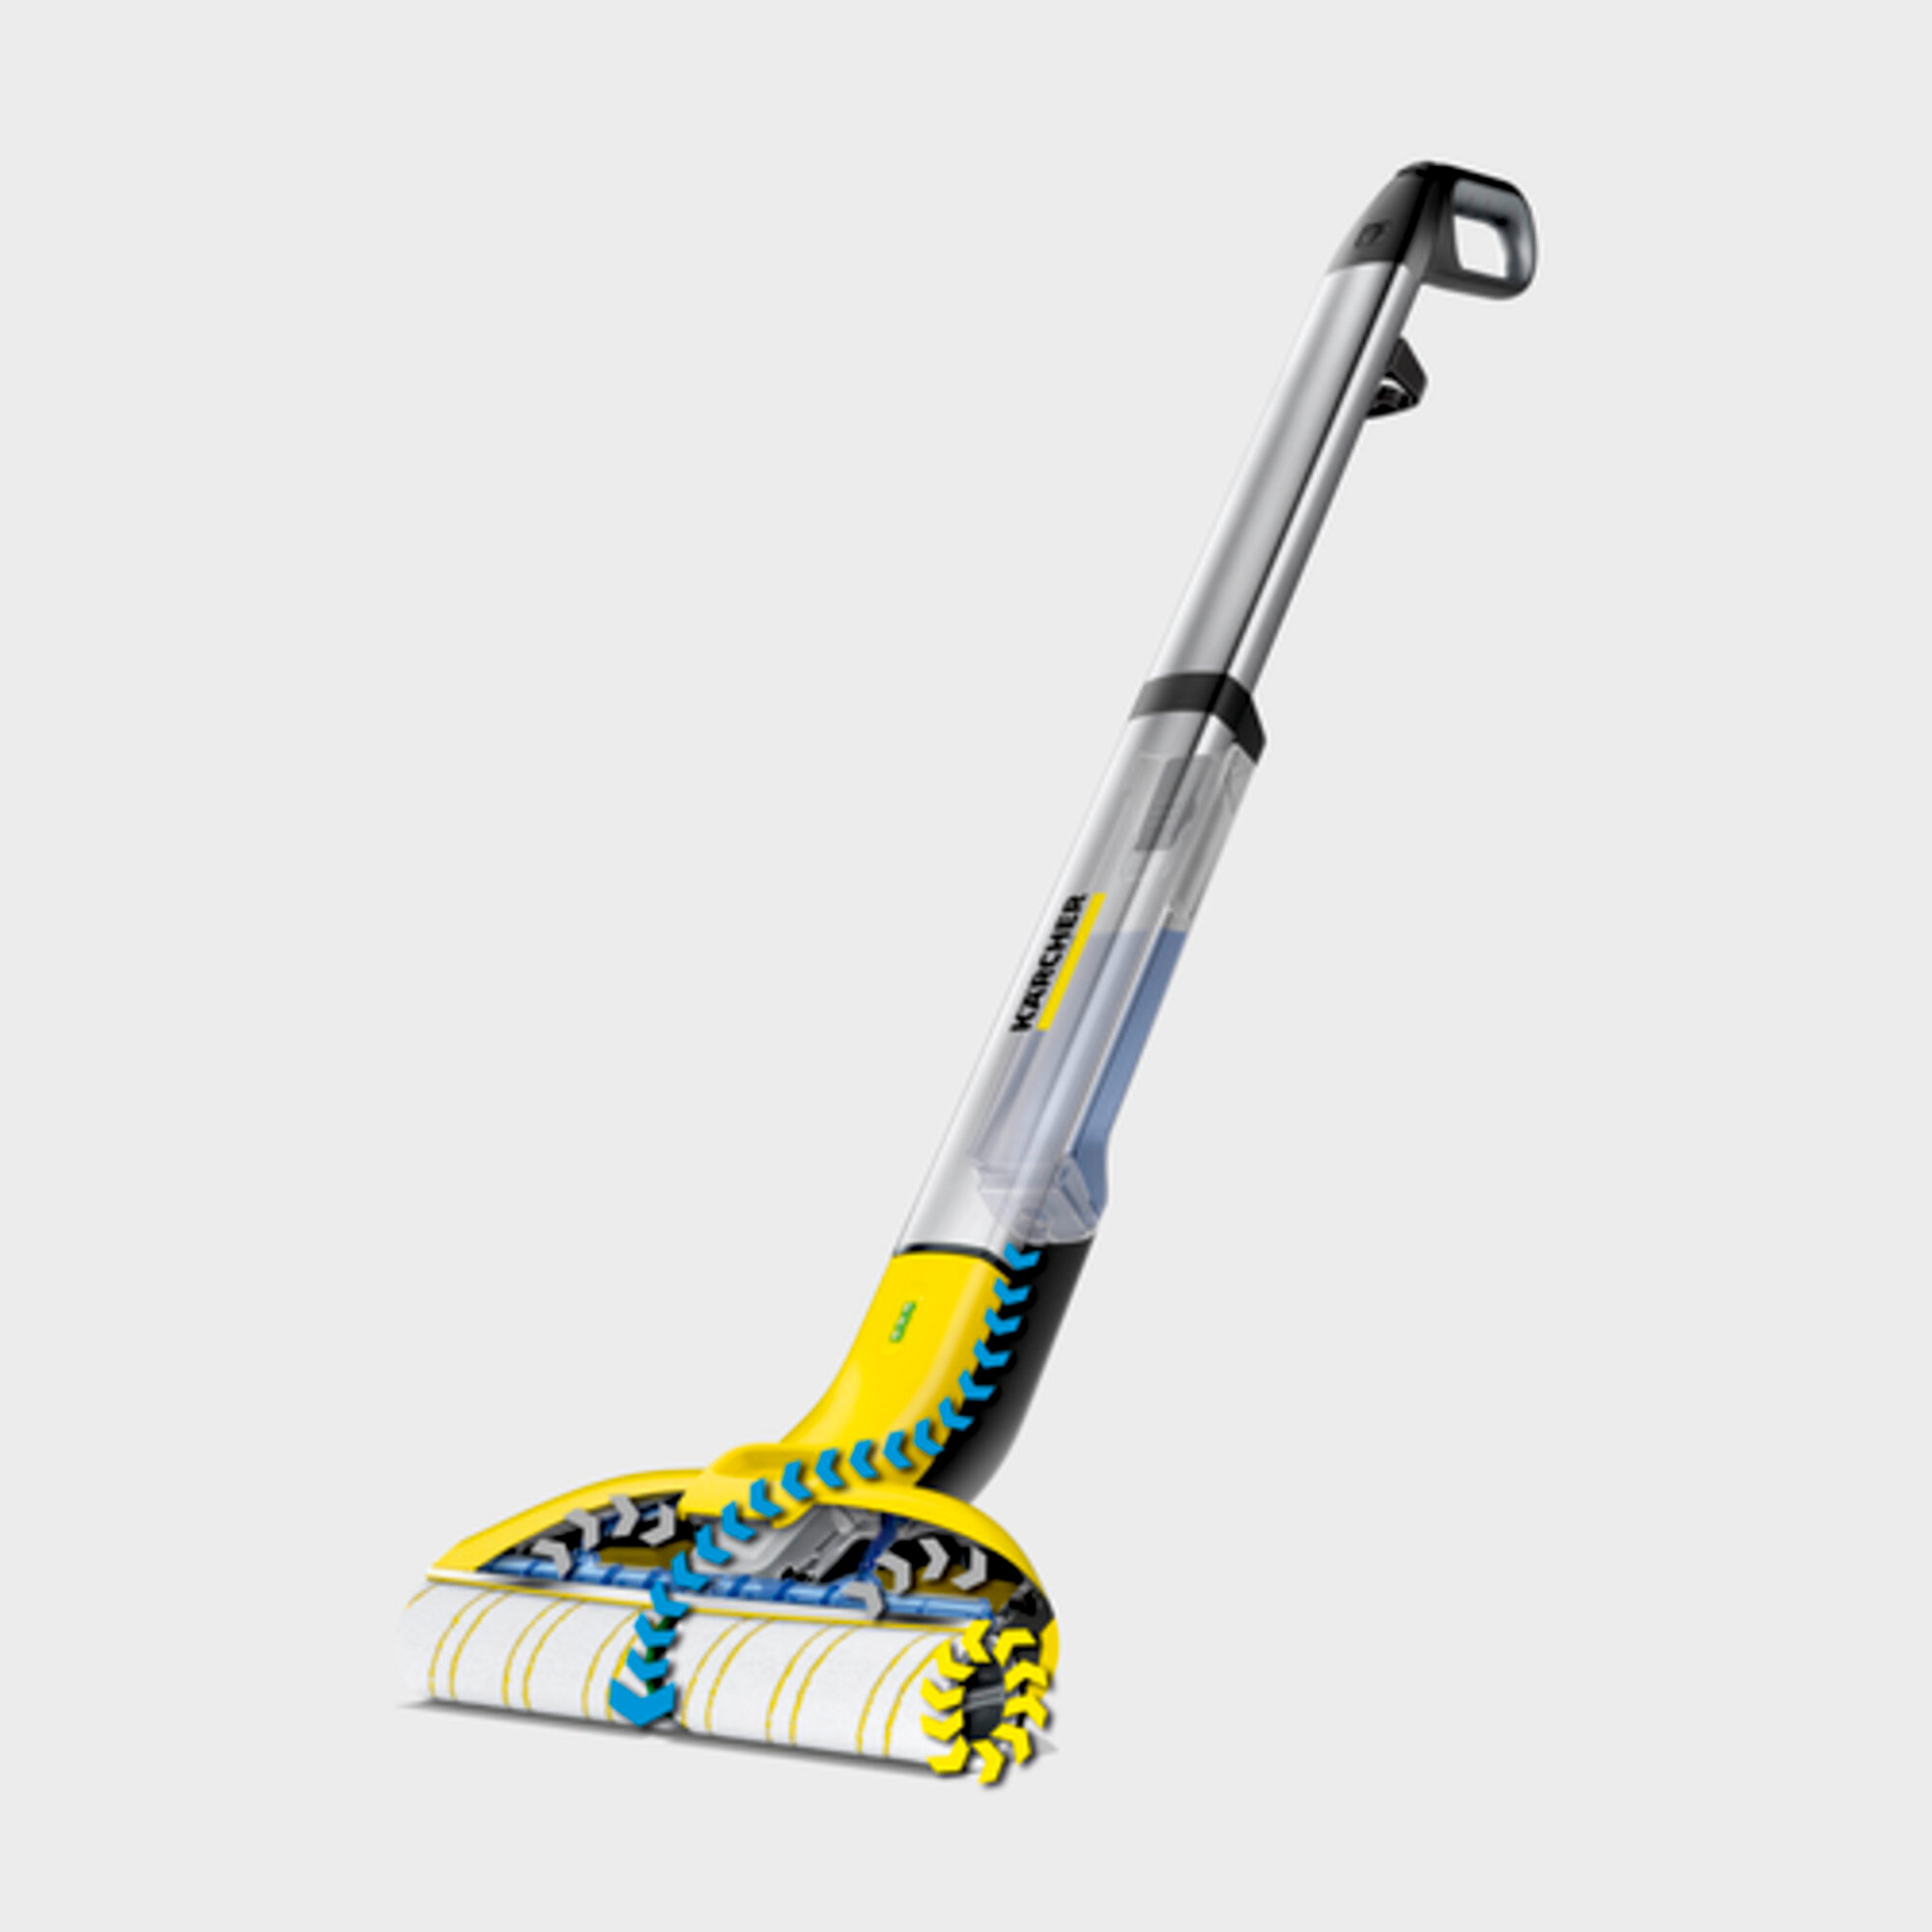 Hard floor cleaner FC 3d Cordless *KAP: Wiping is 20 per cent* cleaner than with a mop and much more convenient